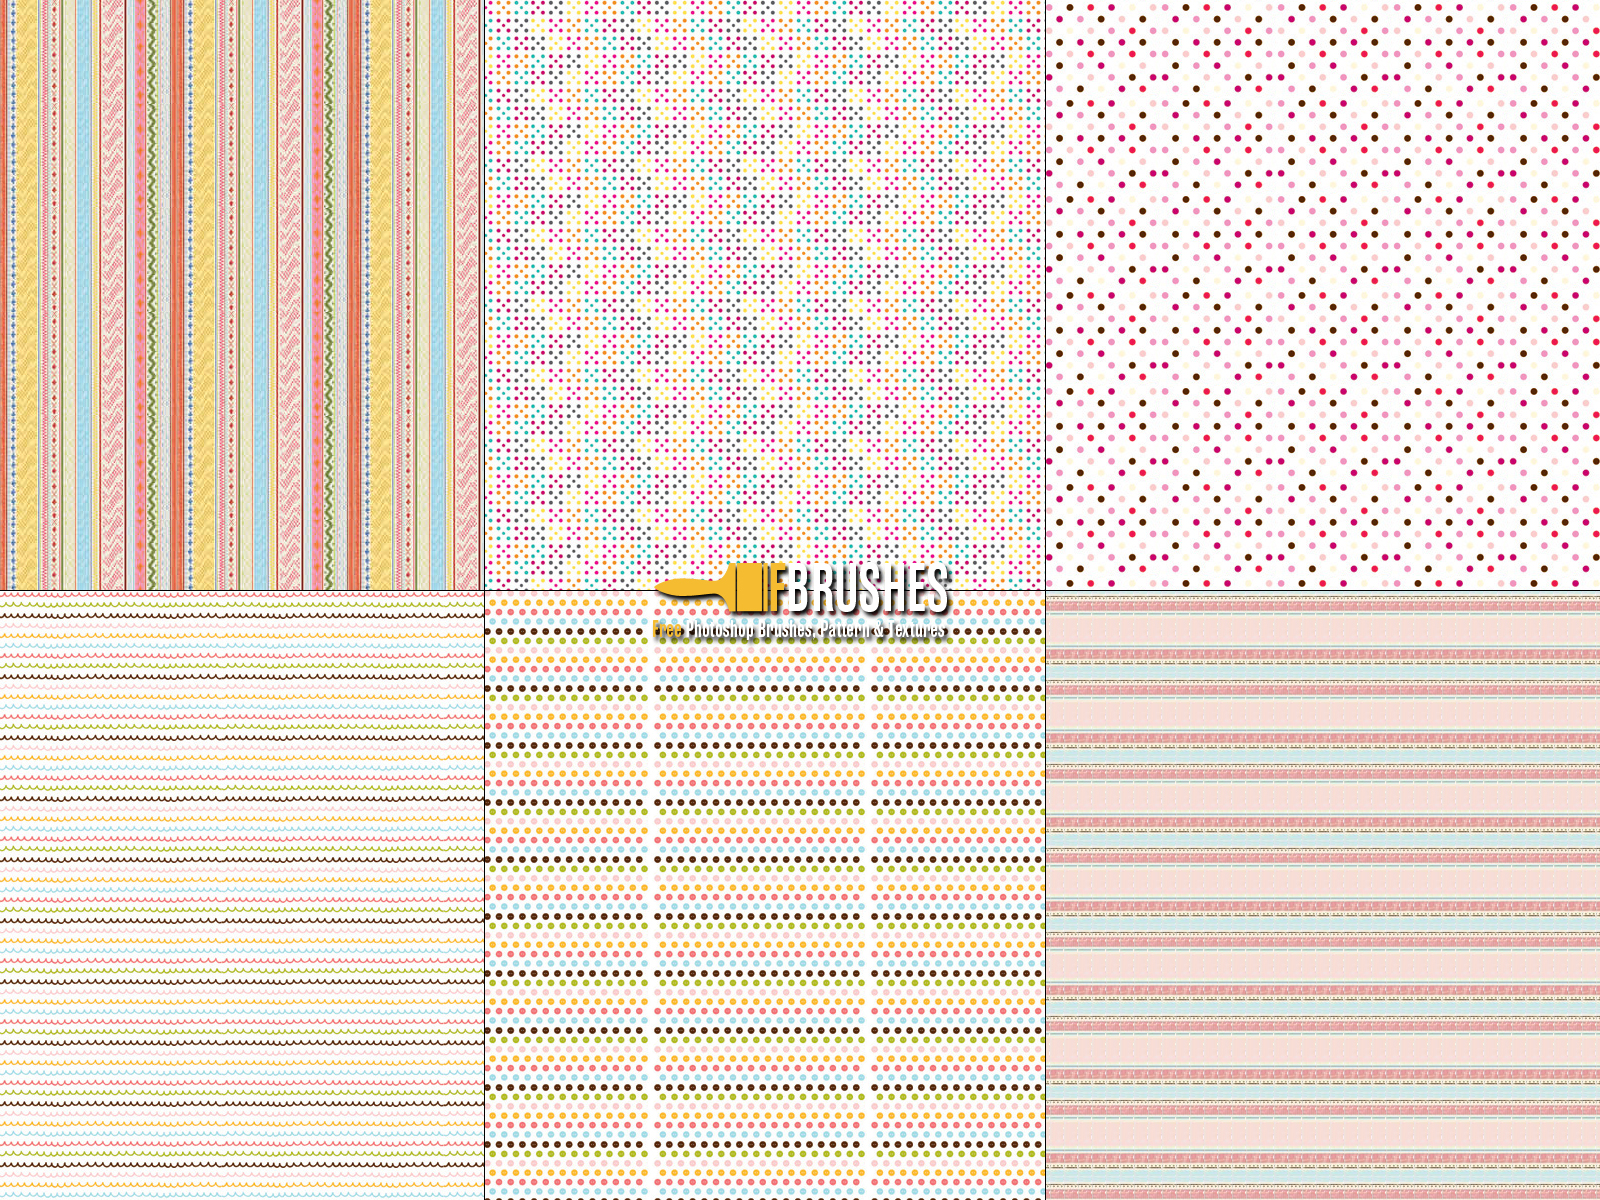 Candy Shop Wallpaper Patterns Fbrushes